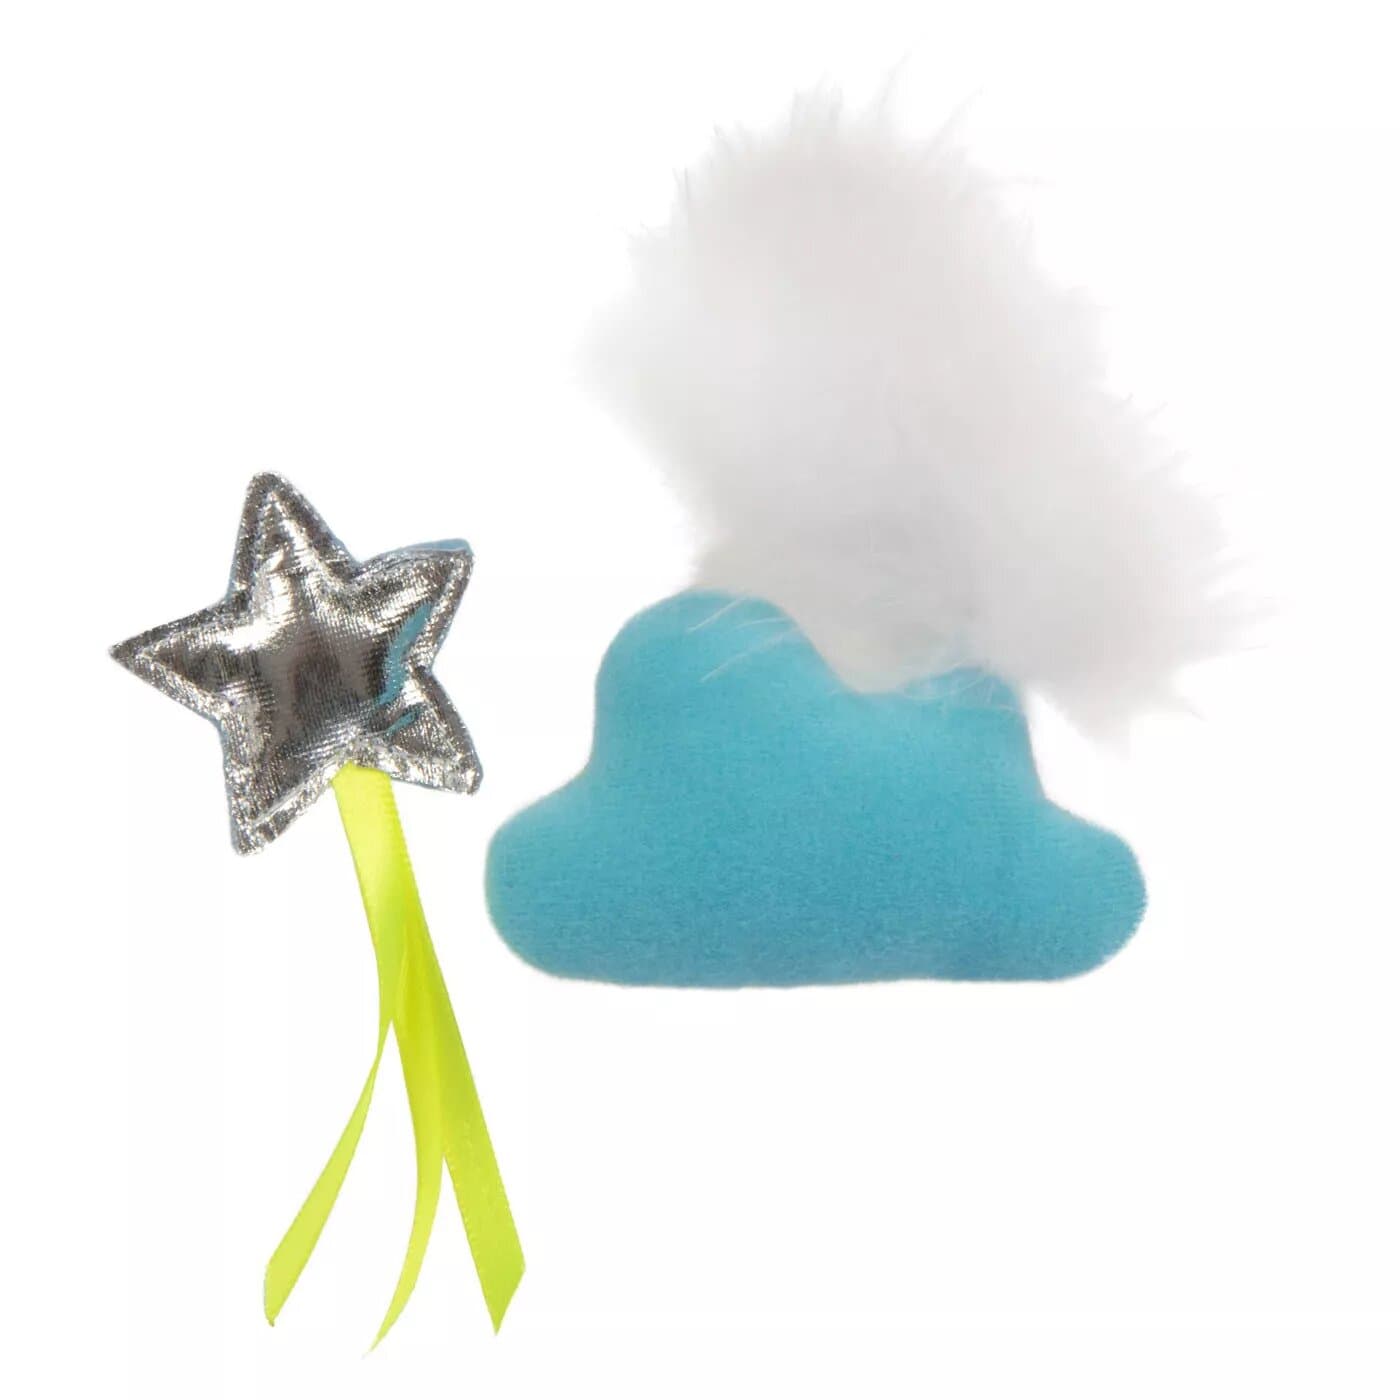 SmartyKat® Twinkle Time S/2 Cloud with Star